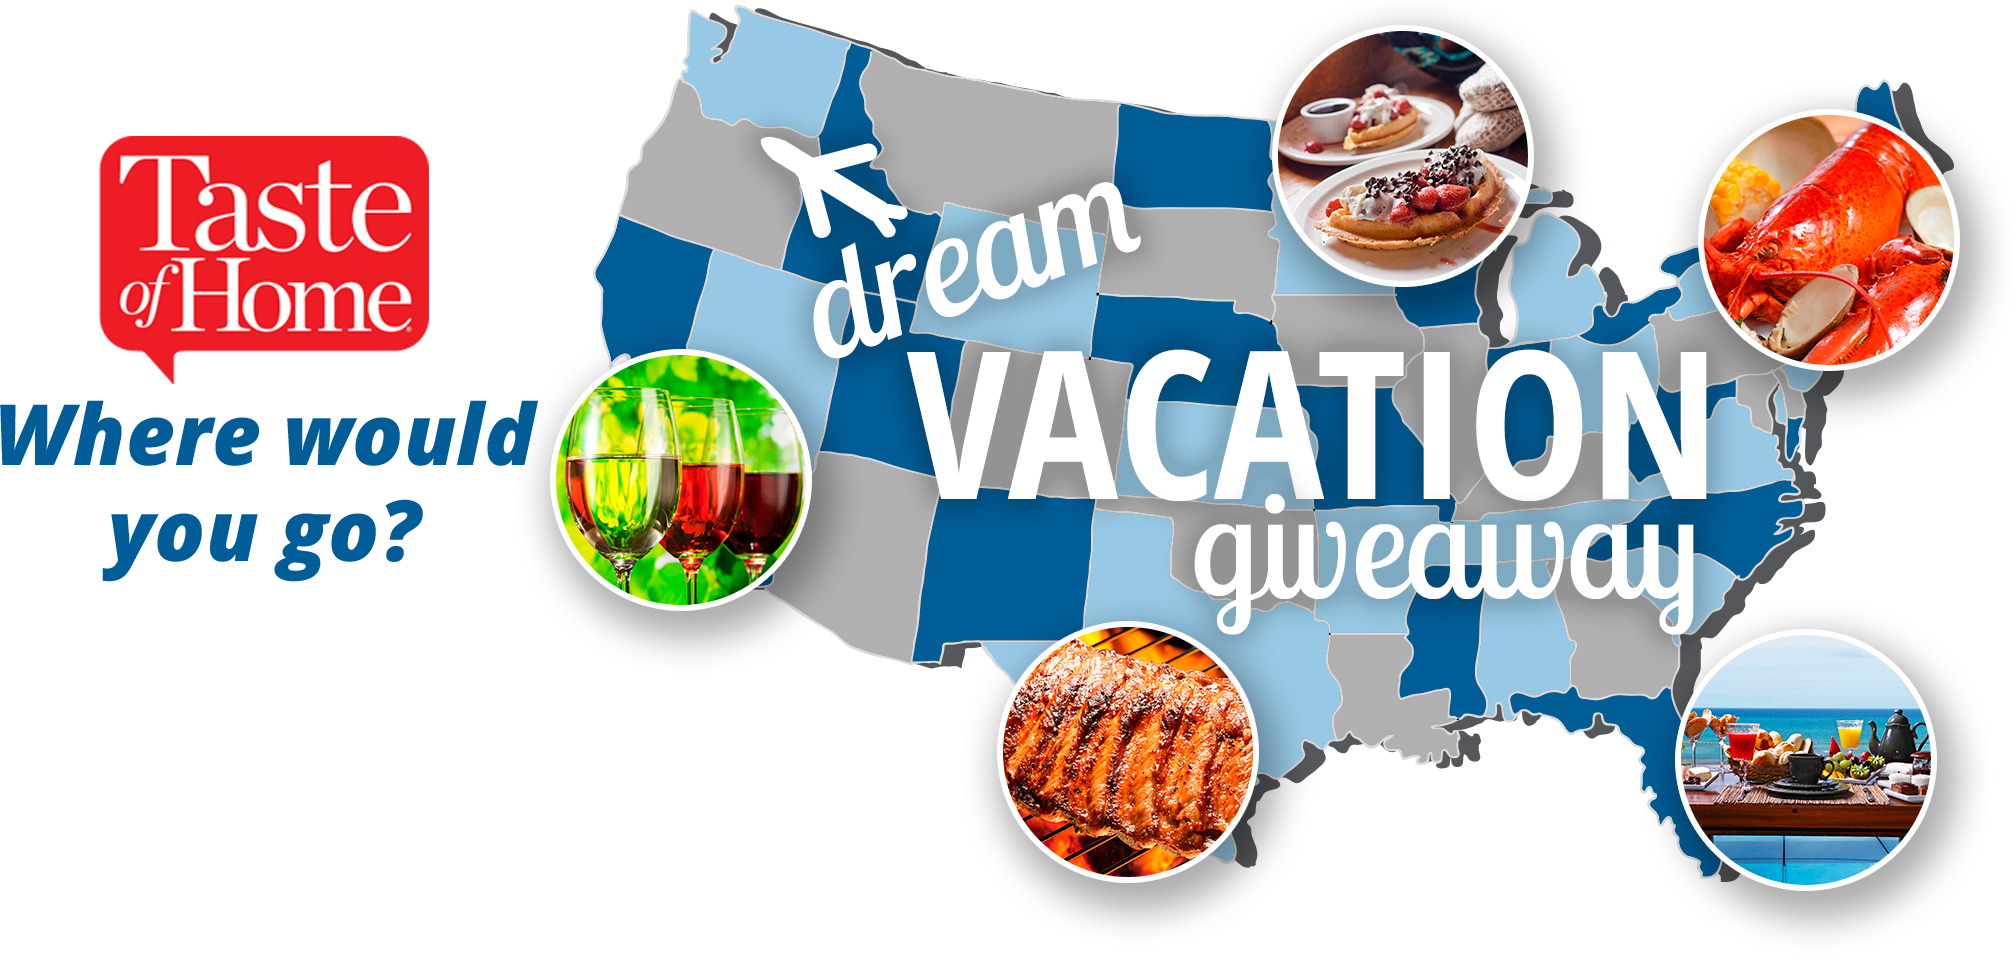 Taste of Home - Dream Vacation Giveway!